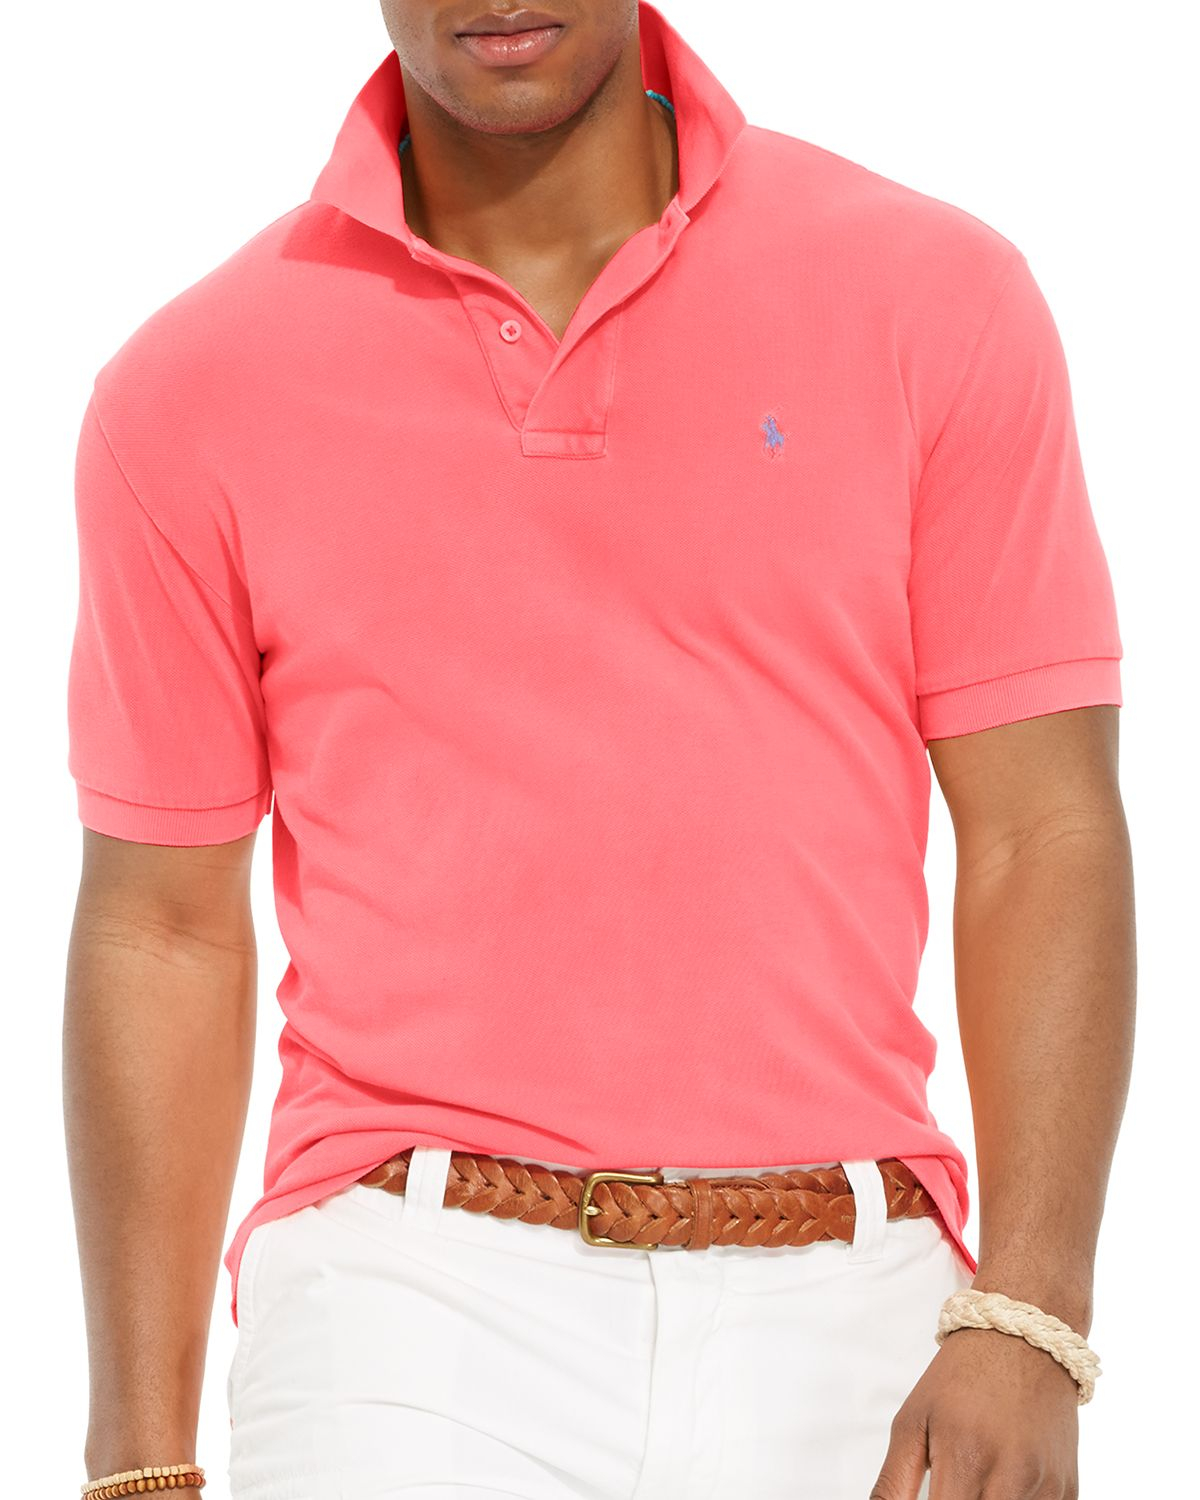 Ralph lauren Polo Neon Mesh Polo Shirt - Classic Fit in Pink for Men